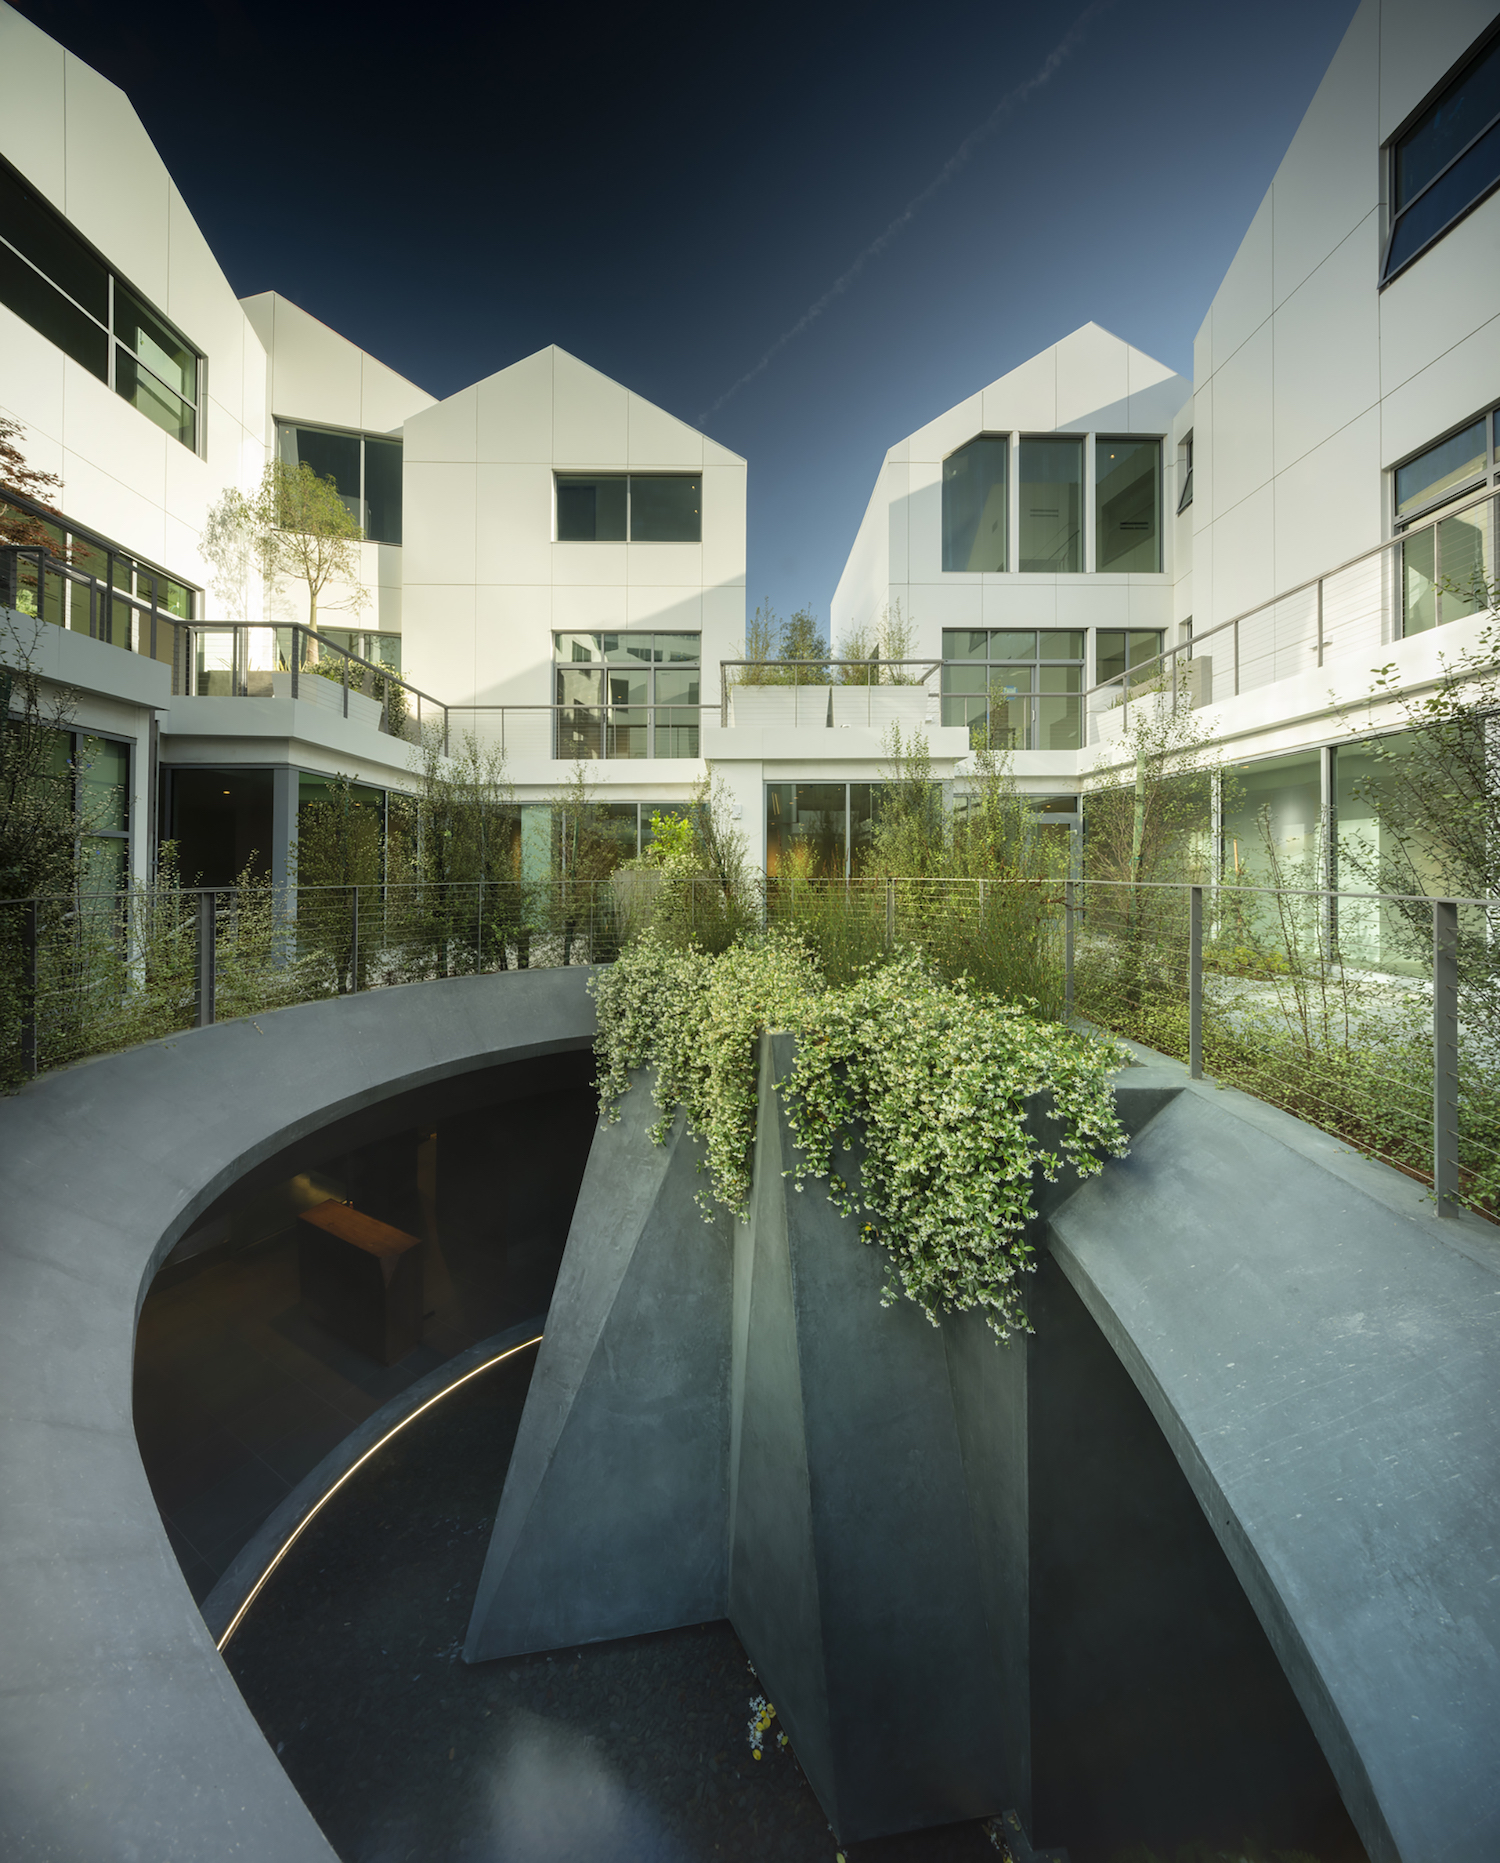 building and plants surrounding a courtyard with a concrete stairwell